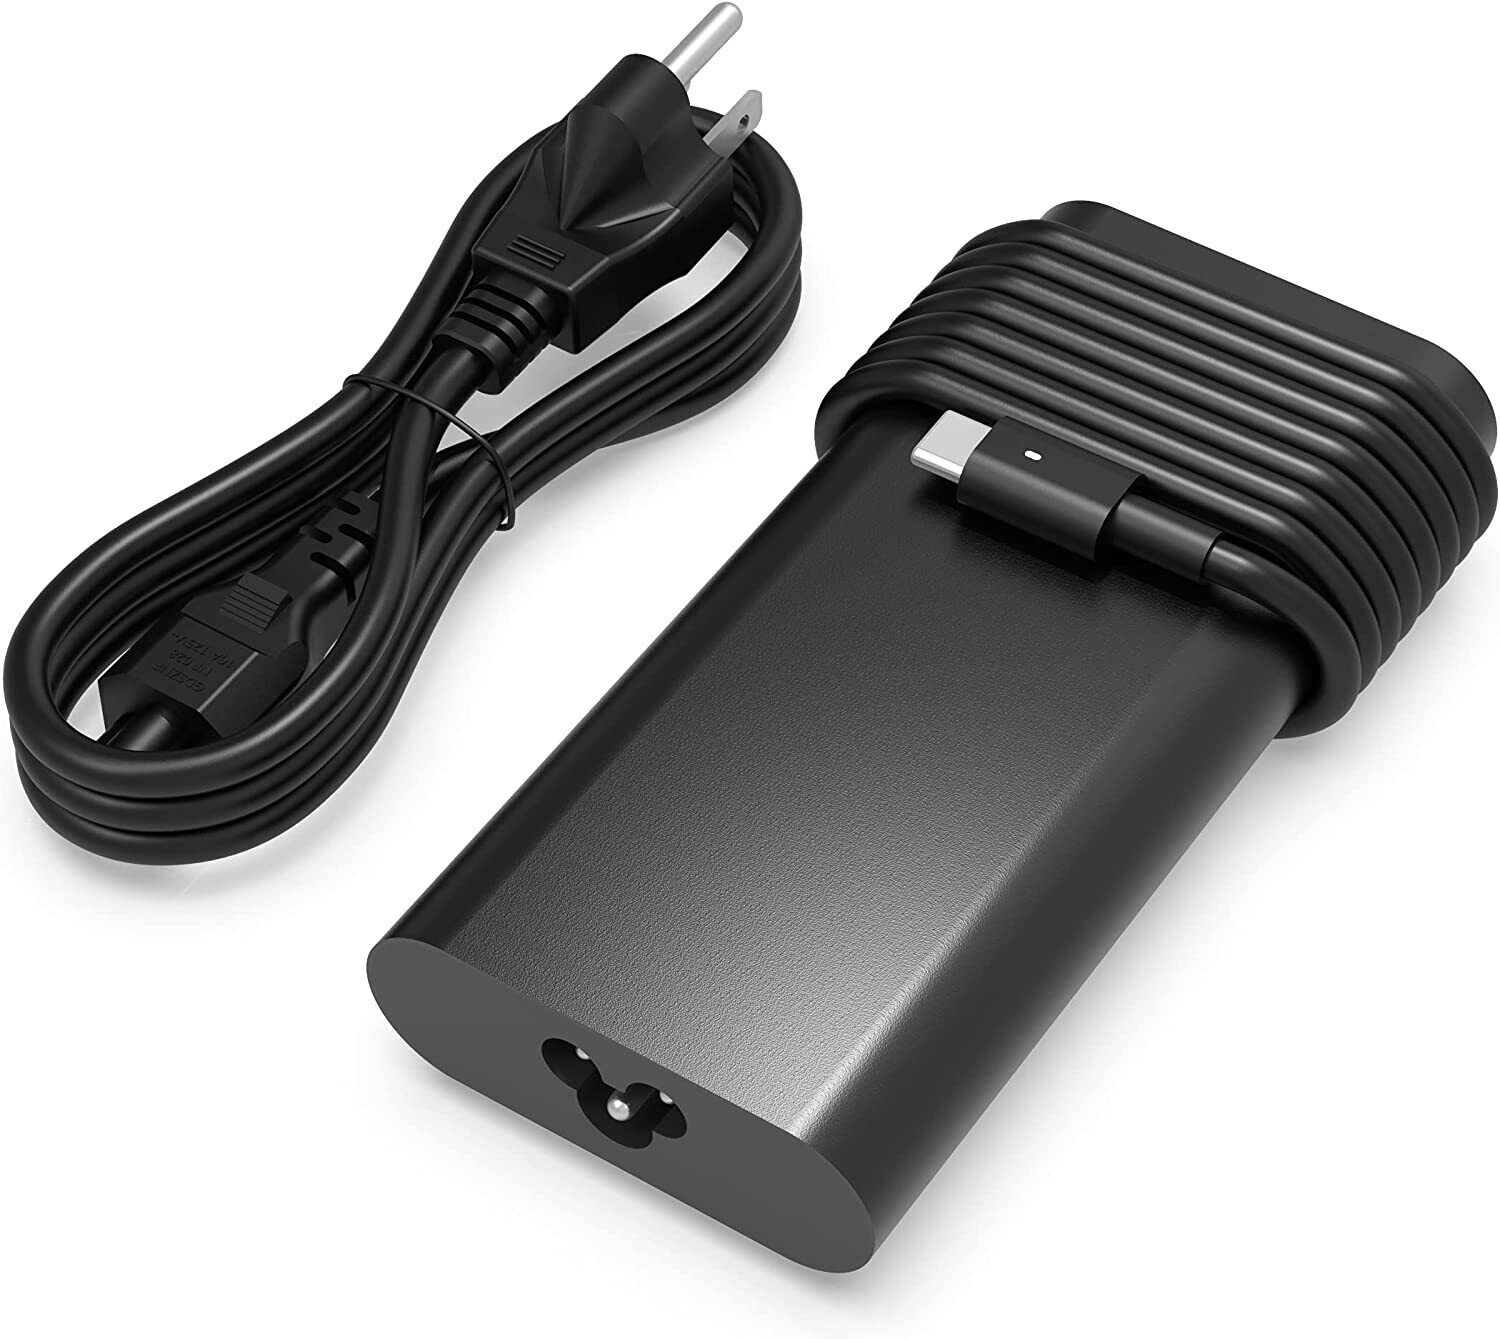 130W USB C Charger For Dell XPS 15 9575 17 Precision 5530 Latitude 7410 7310 721